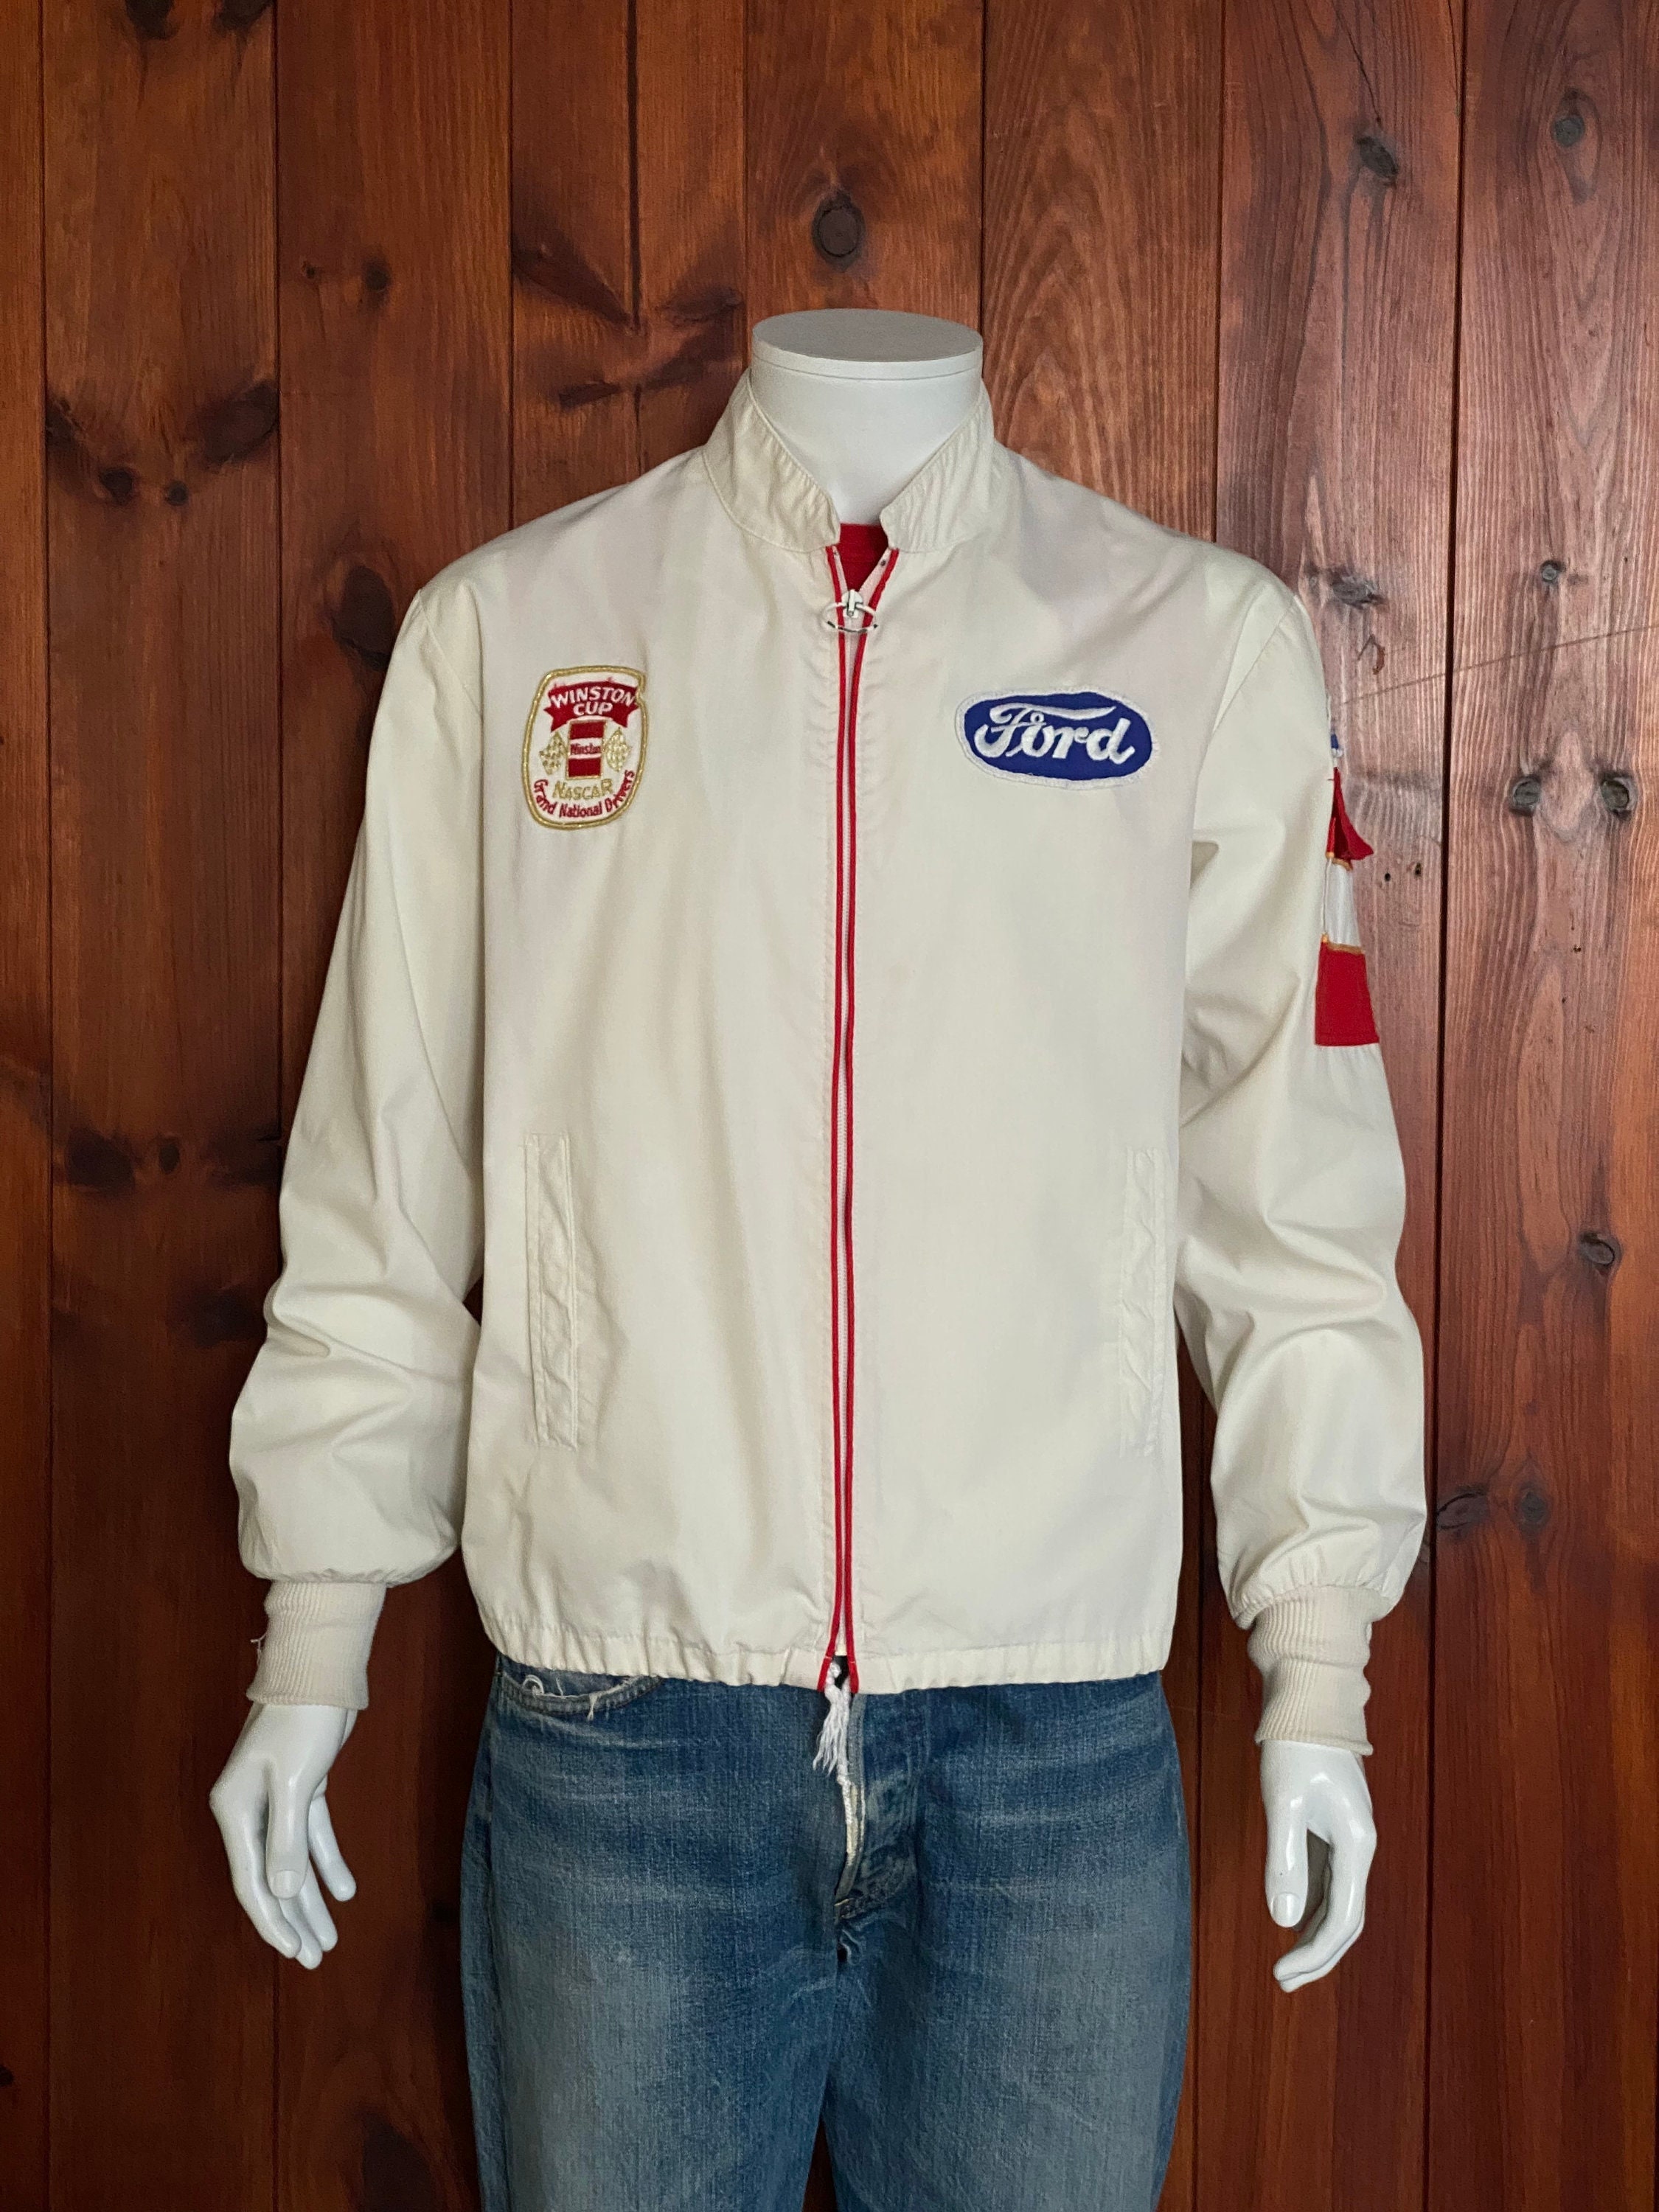 Size M/l . 70s Vintage Ford Racing Cotton Jacket - Etsy